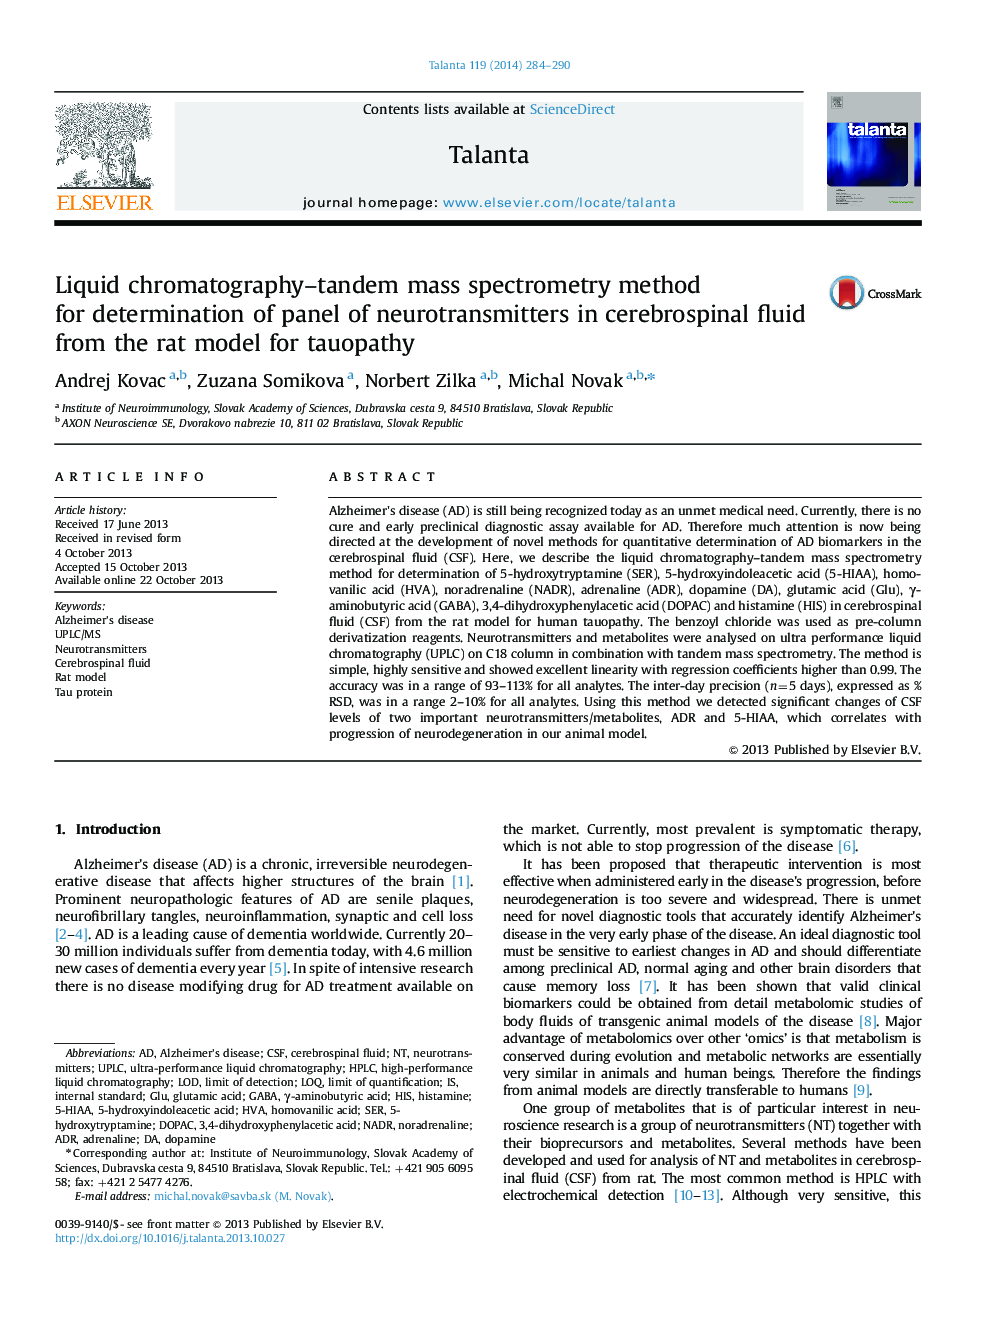 Liquid chromatography-tandem mass spectrometry method for determination of panel of neurotransmitters in cerebrospinal fluid from the rat model for tauopathy